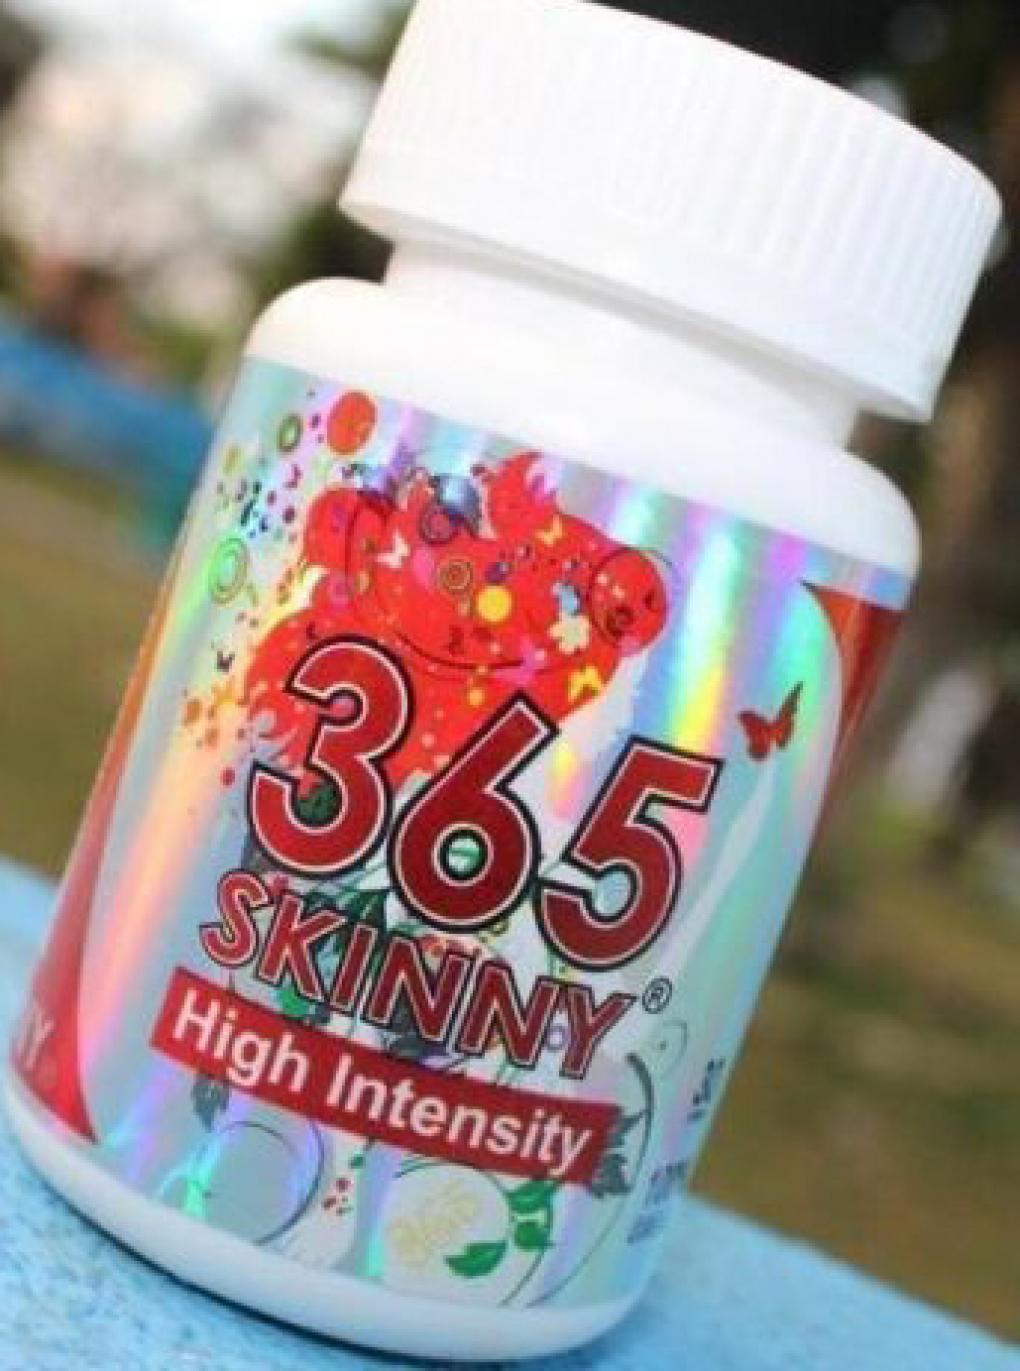 Image of the illigal product: 365 Skinny High Intensity